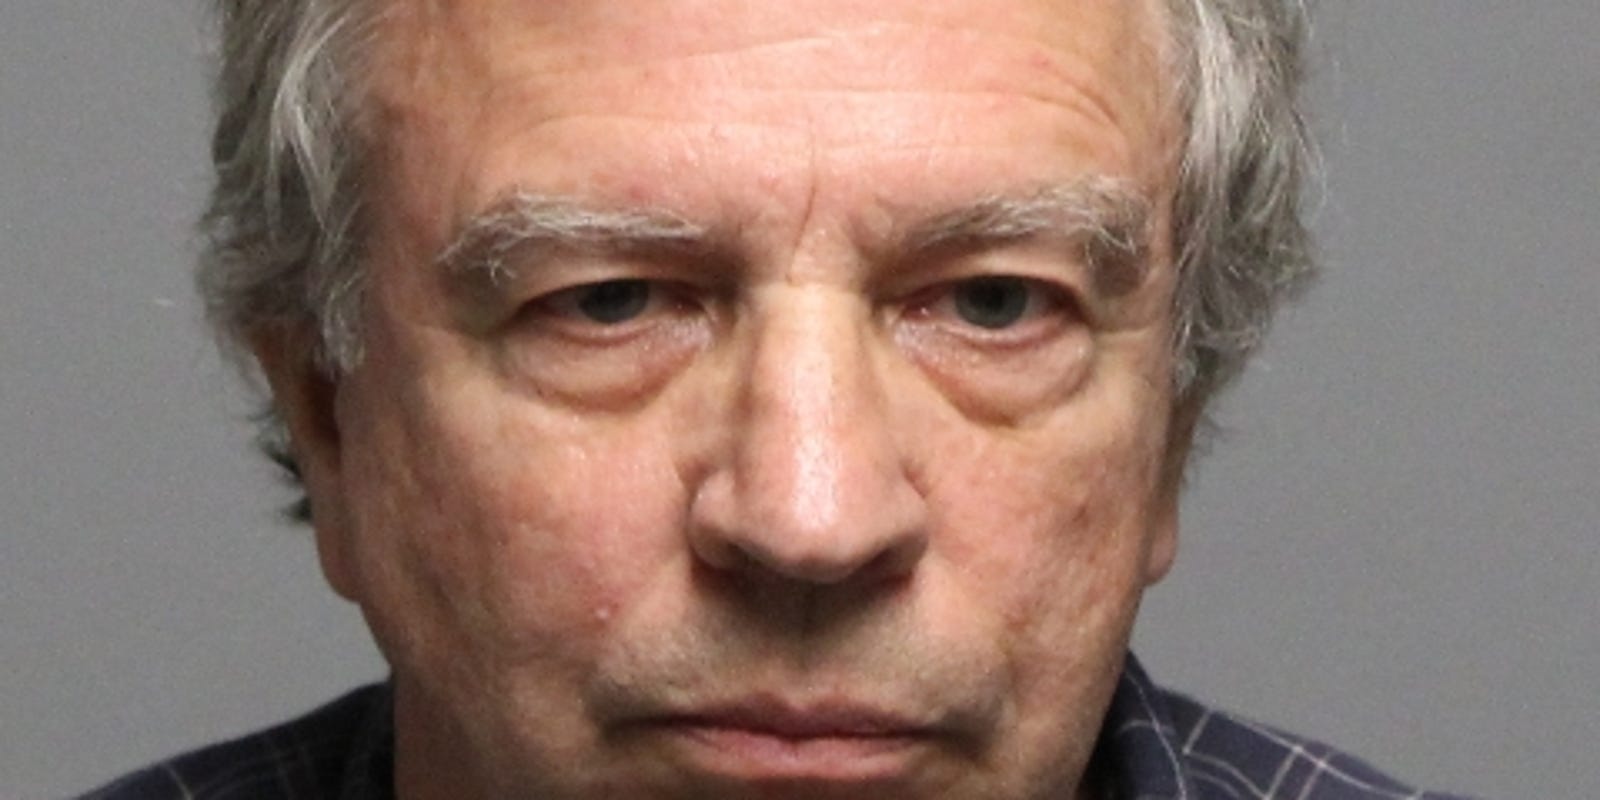 Porn Accidents And Injuries - Hunterdon County NJ man, 70, charged with child porn possession